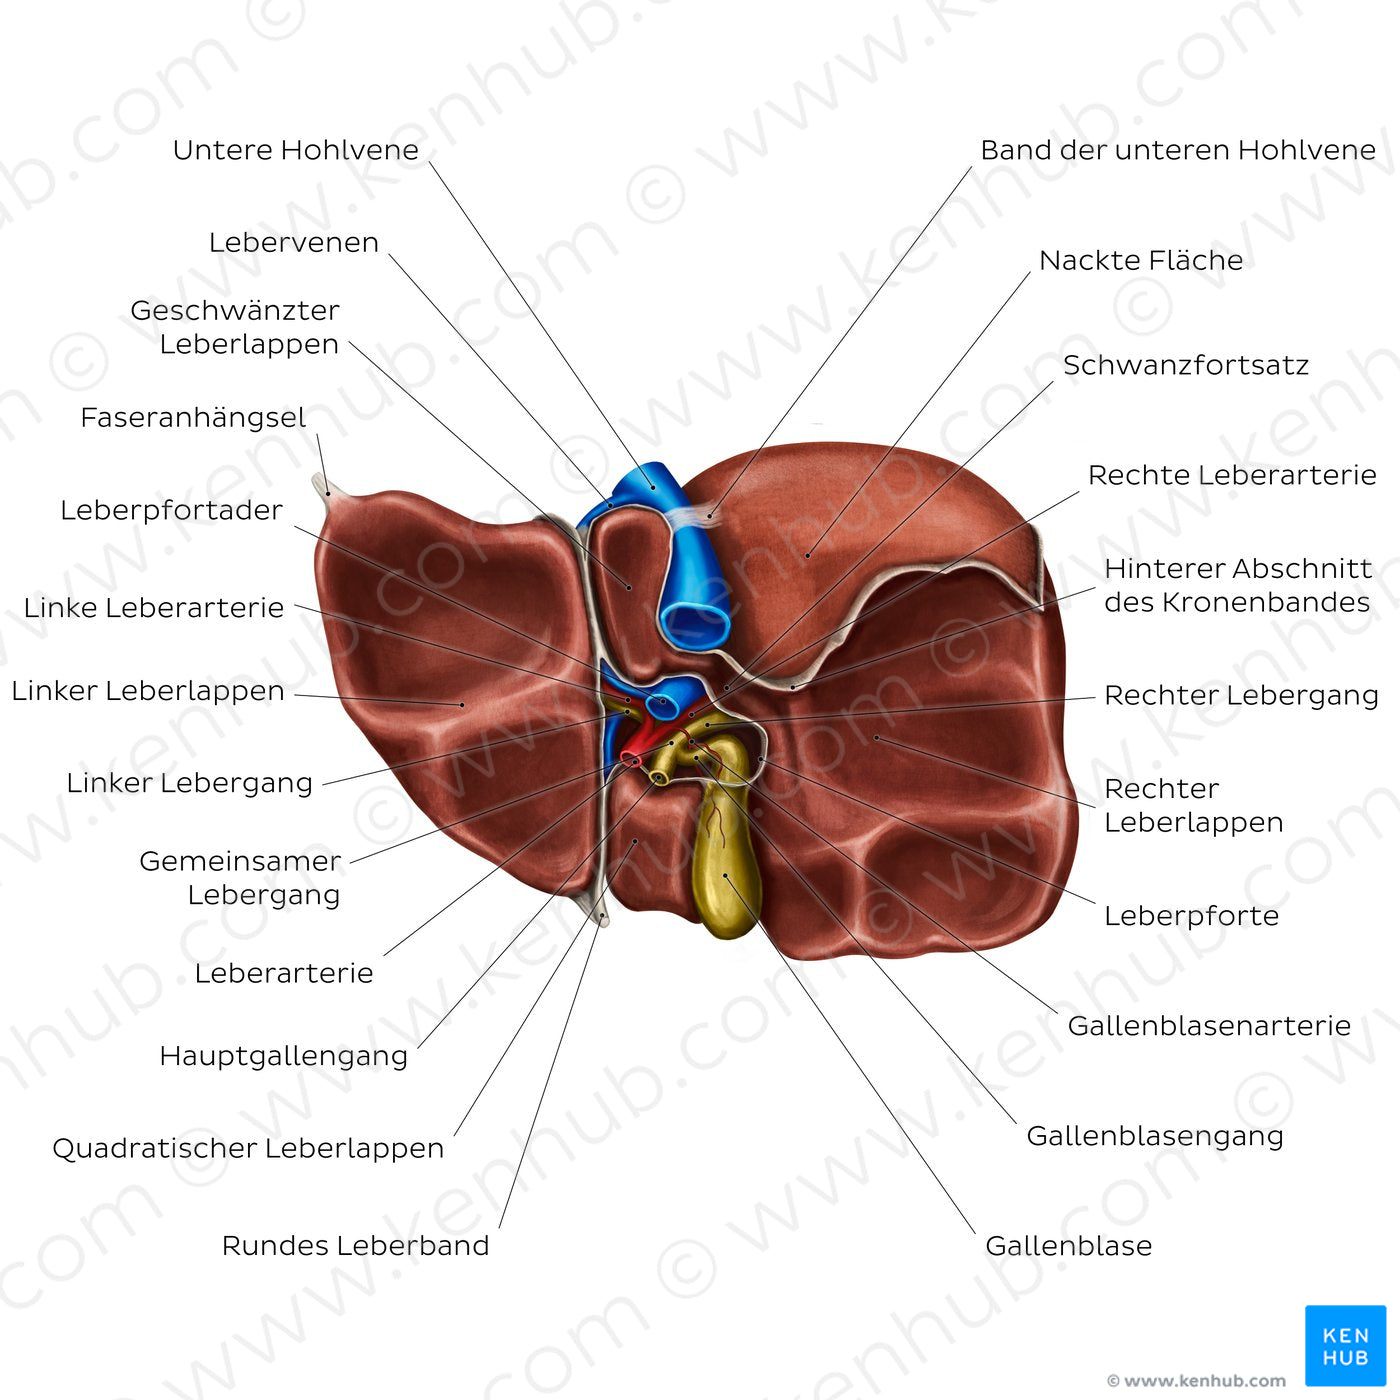 Inferior view of the liver (German)